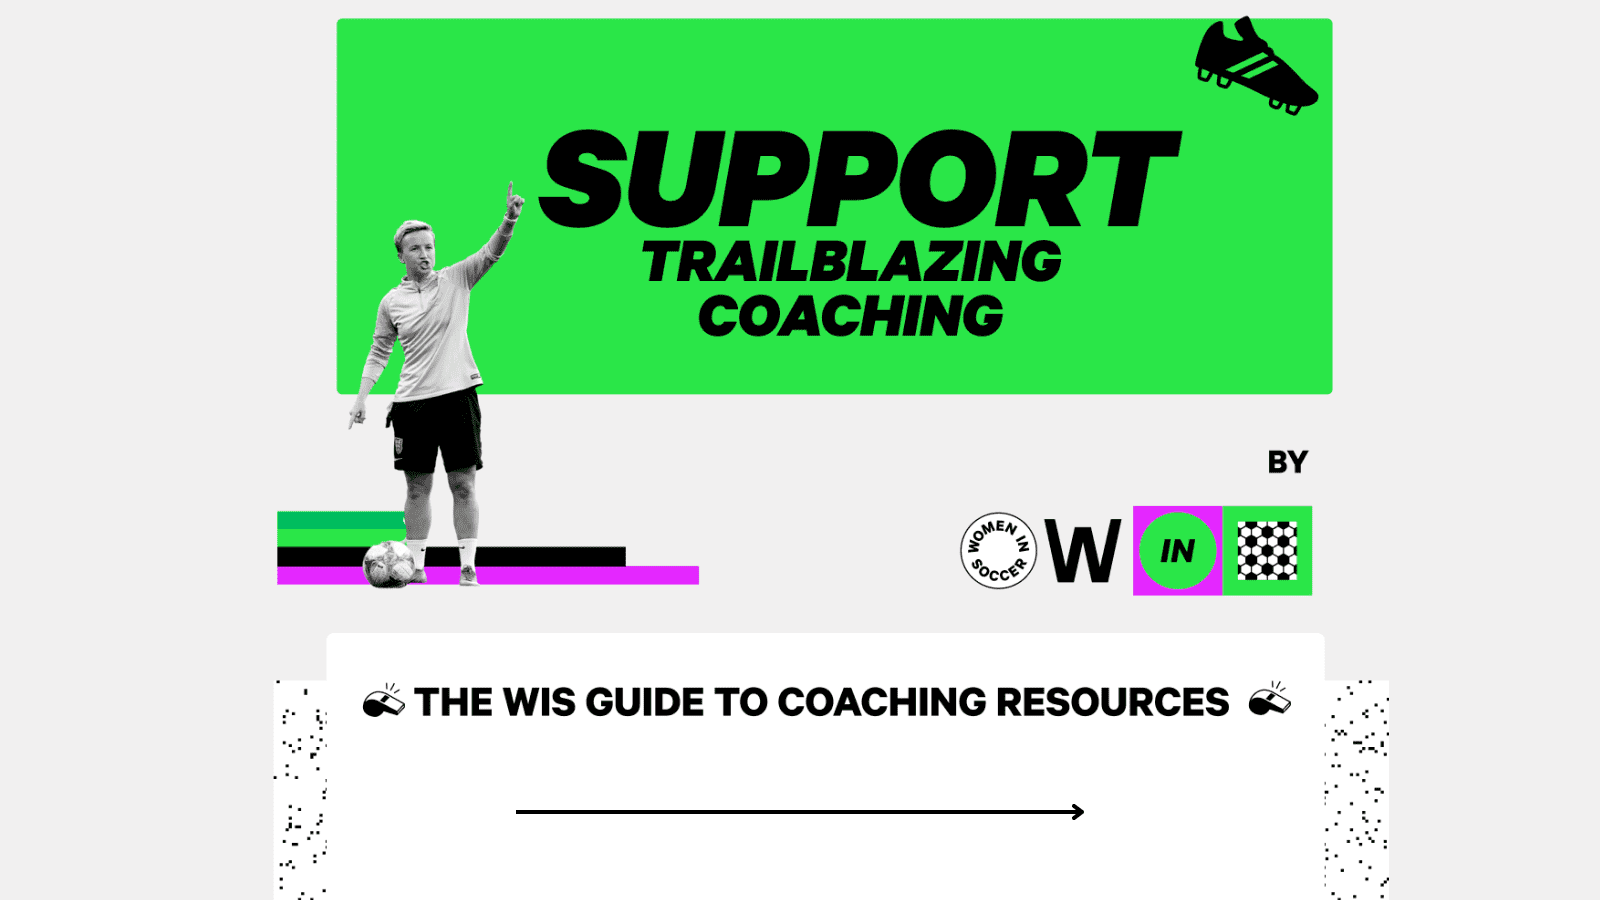 WIS GUIDE TO COACHING RESOURCES